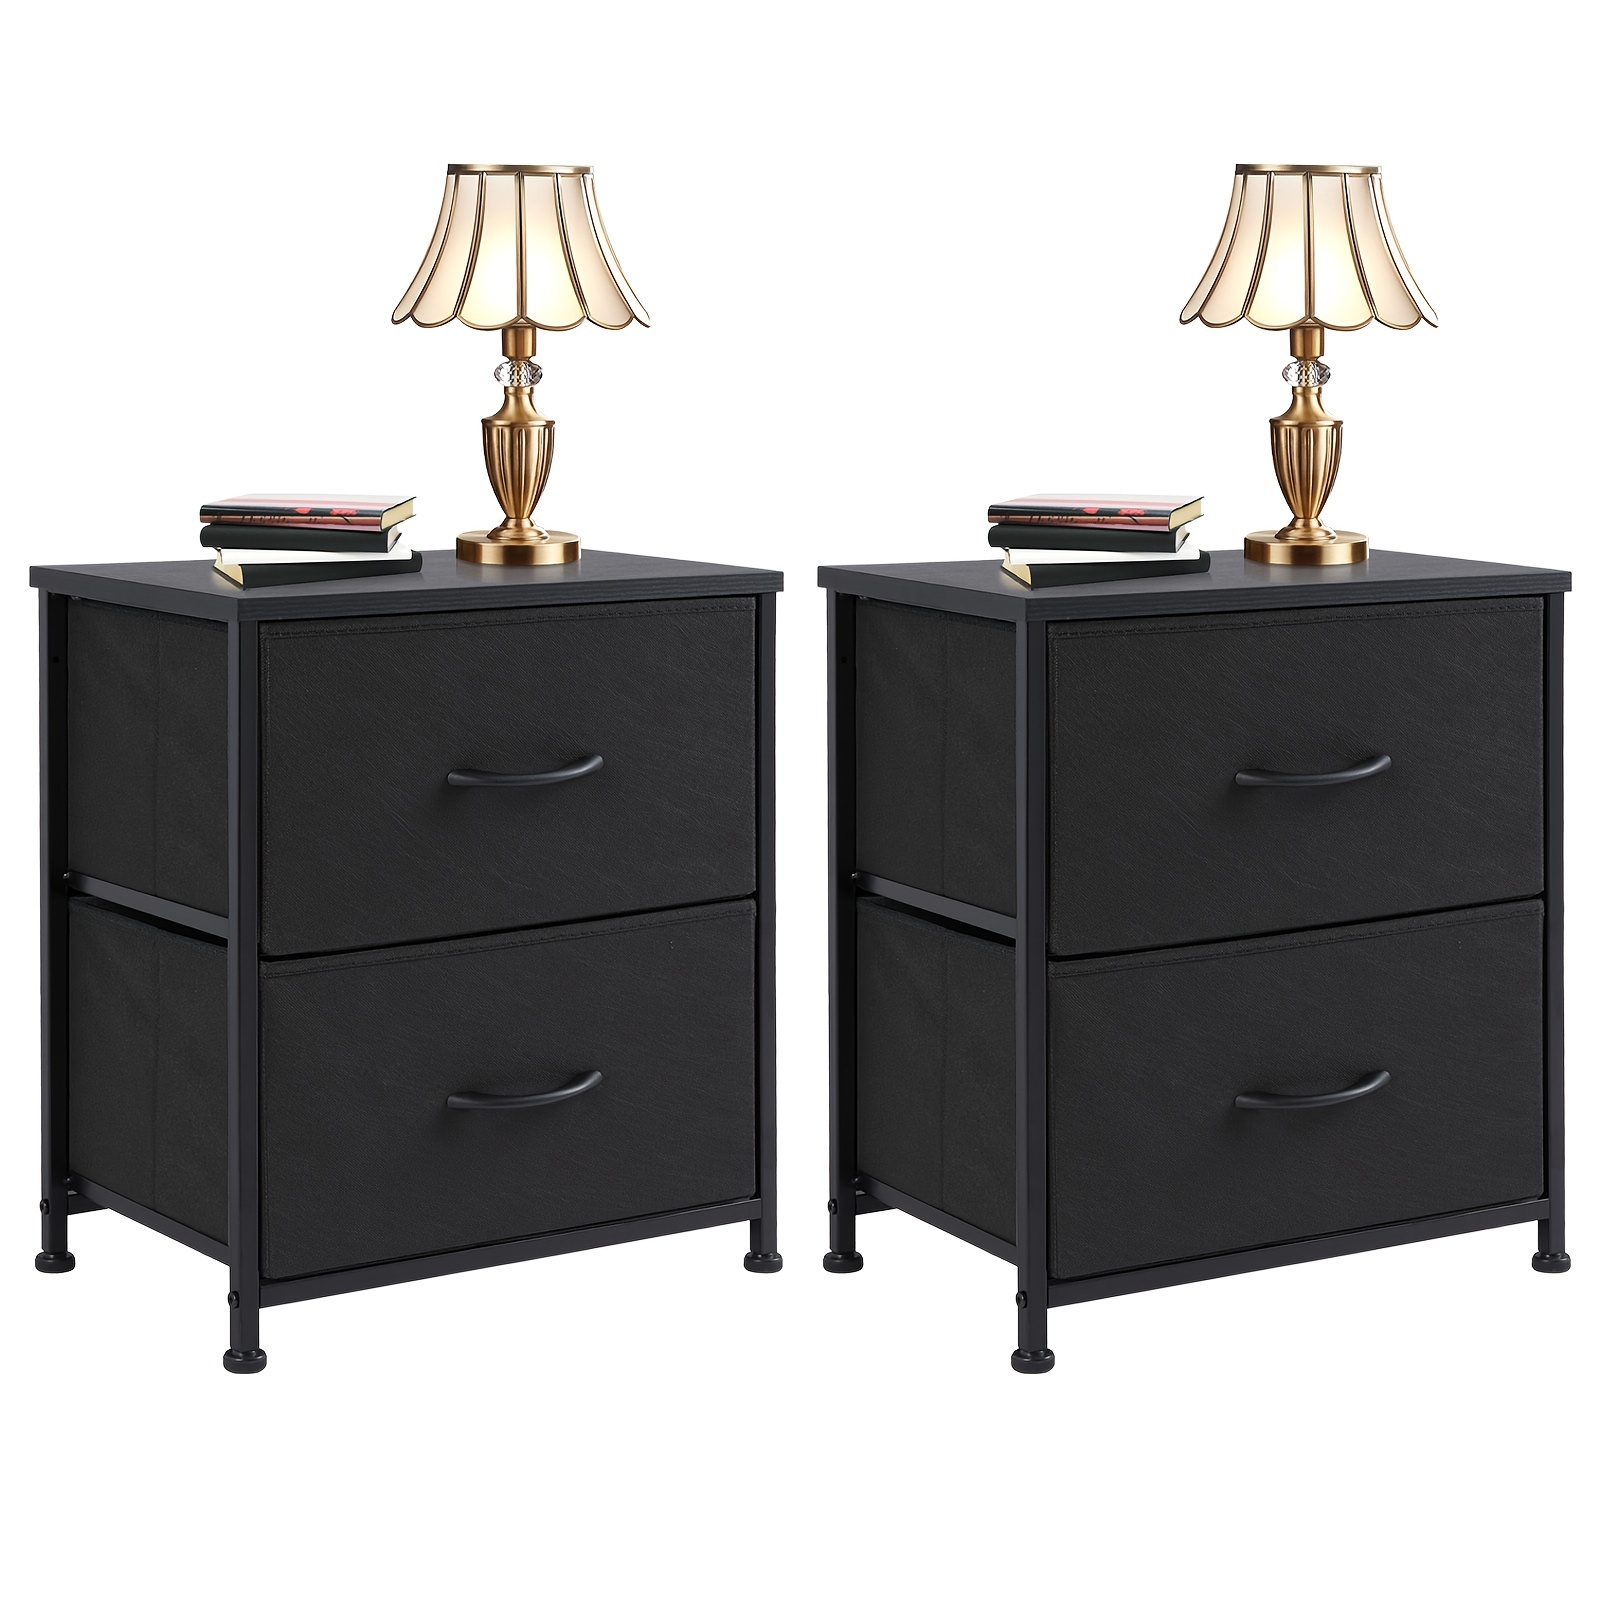 

Olixis Set Of 2 Nightstand With 2 Storage Drawers, 20" Height Small Furniture End Table, Wooden Top Fabric Cabinet Night Stand Mini Dresser